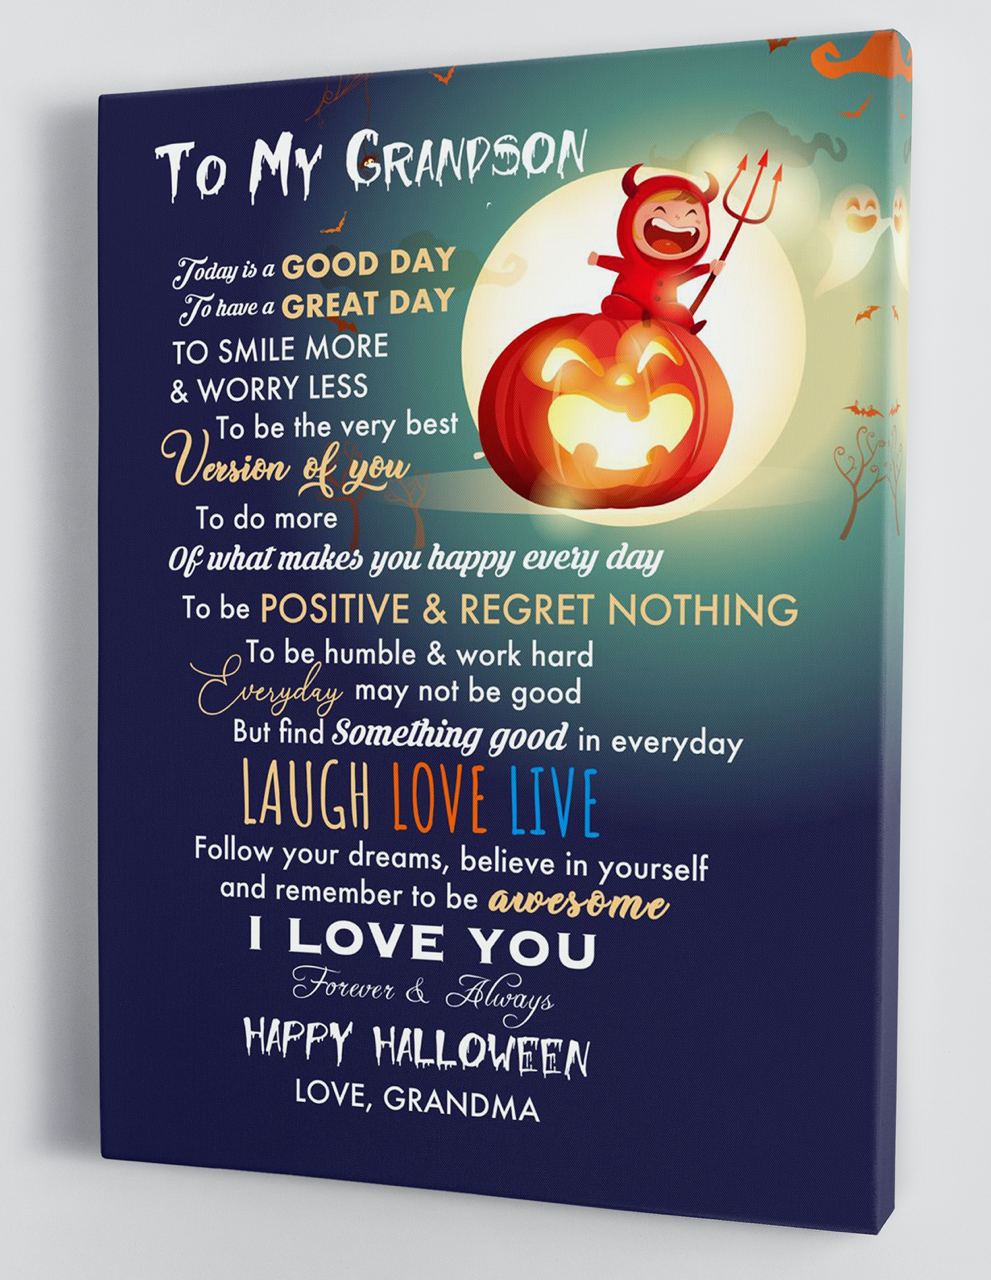 To My Grandson - From Grandma - Halloween Canvas Gift GMS056